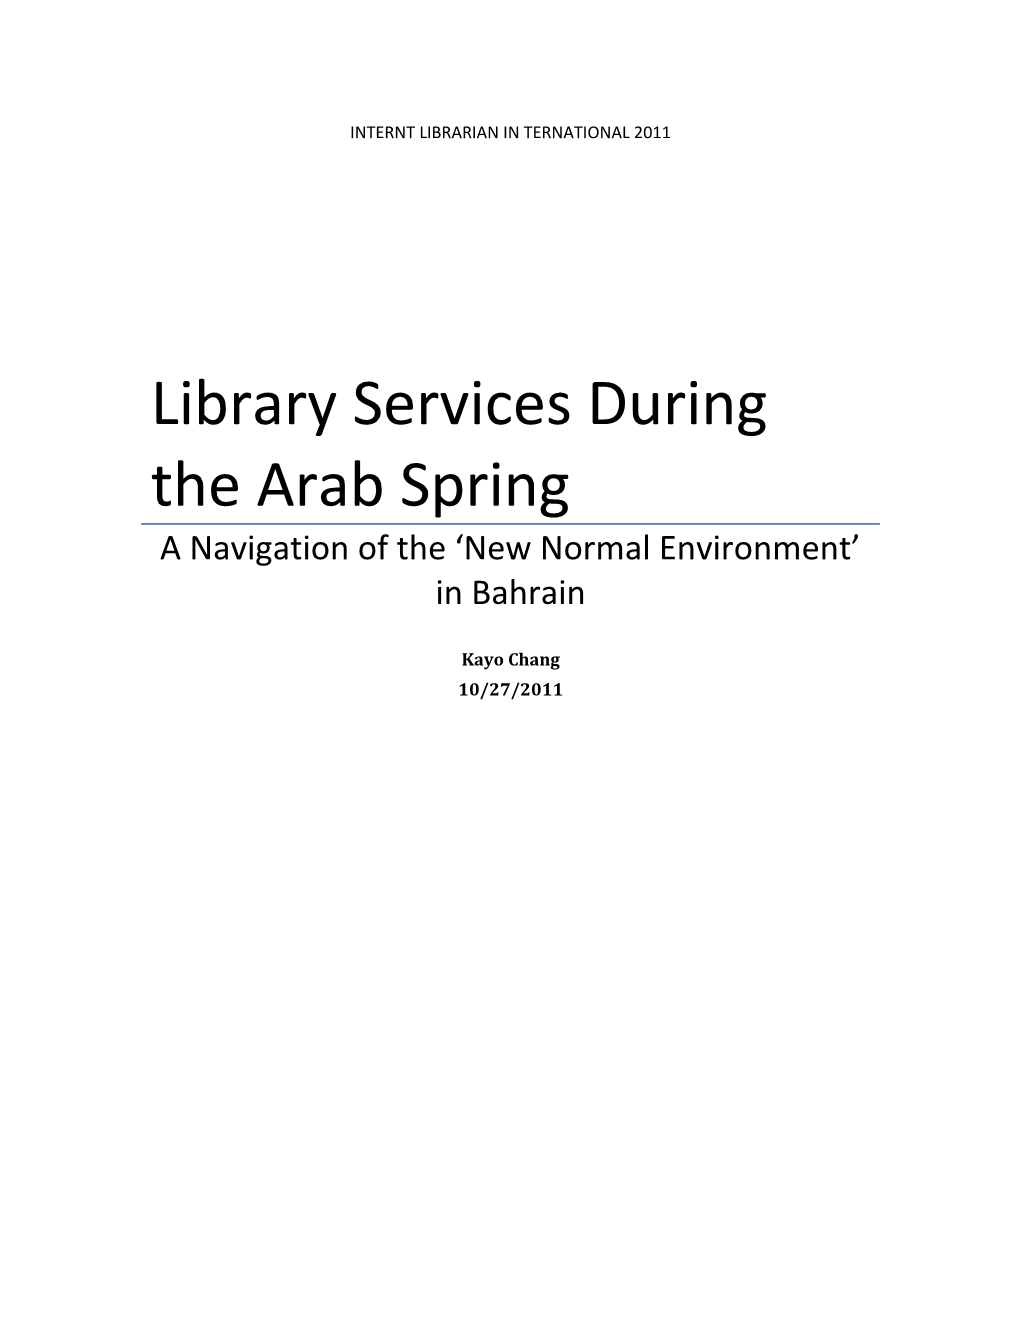 Library Services During the Arab Spring